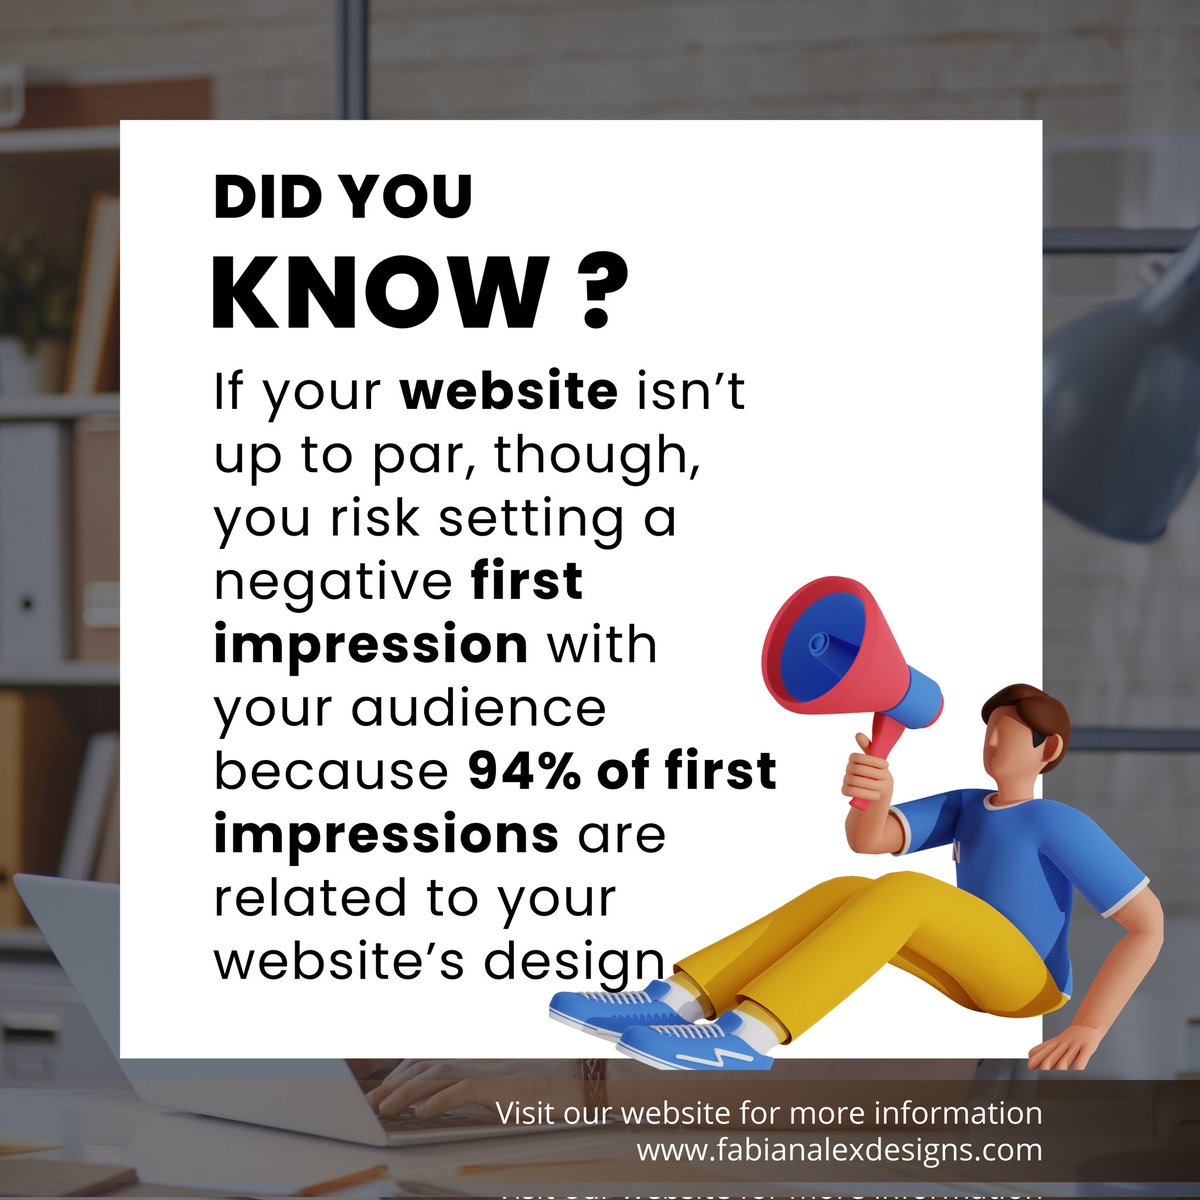 Improving your website's design can boost its credibility, which will lead to increased sales for your company.

#webdesigners #topography #uidesigners #ui #ux #uxdesign #uxdesigner #squarespace #wix #templates #security #backup #updates #webdesign #webanalytics #DataAnalytics